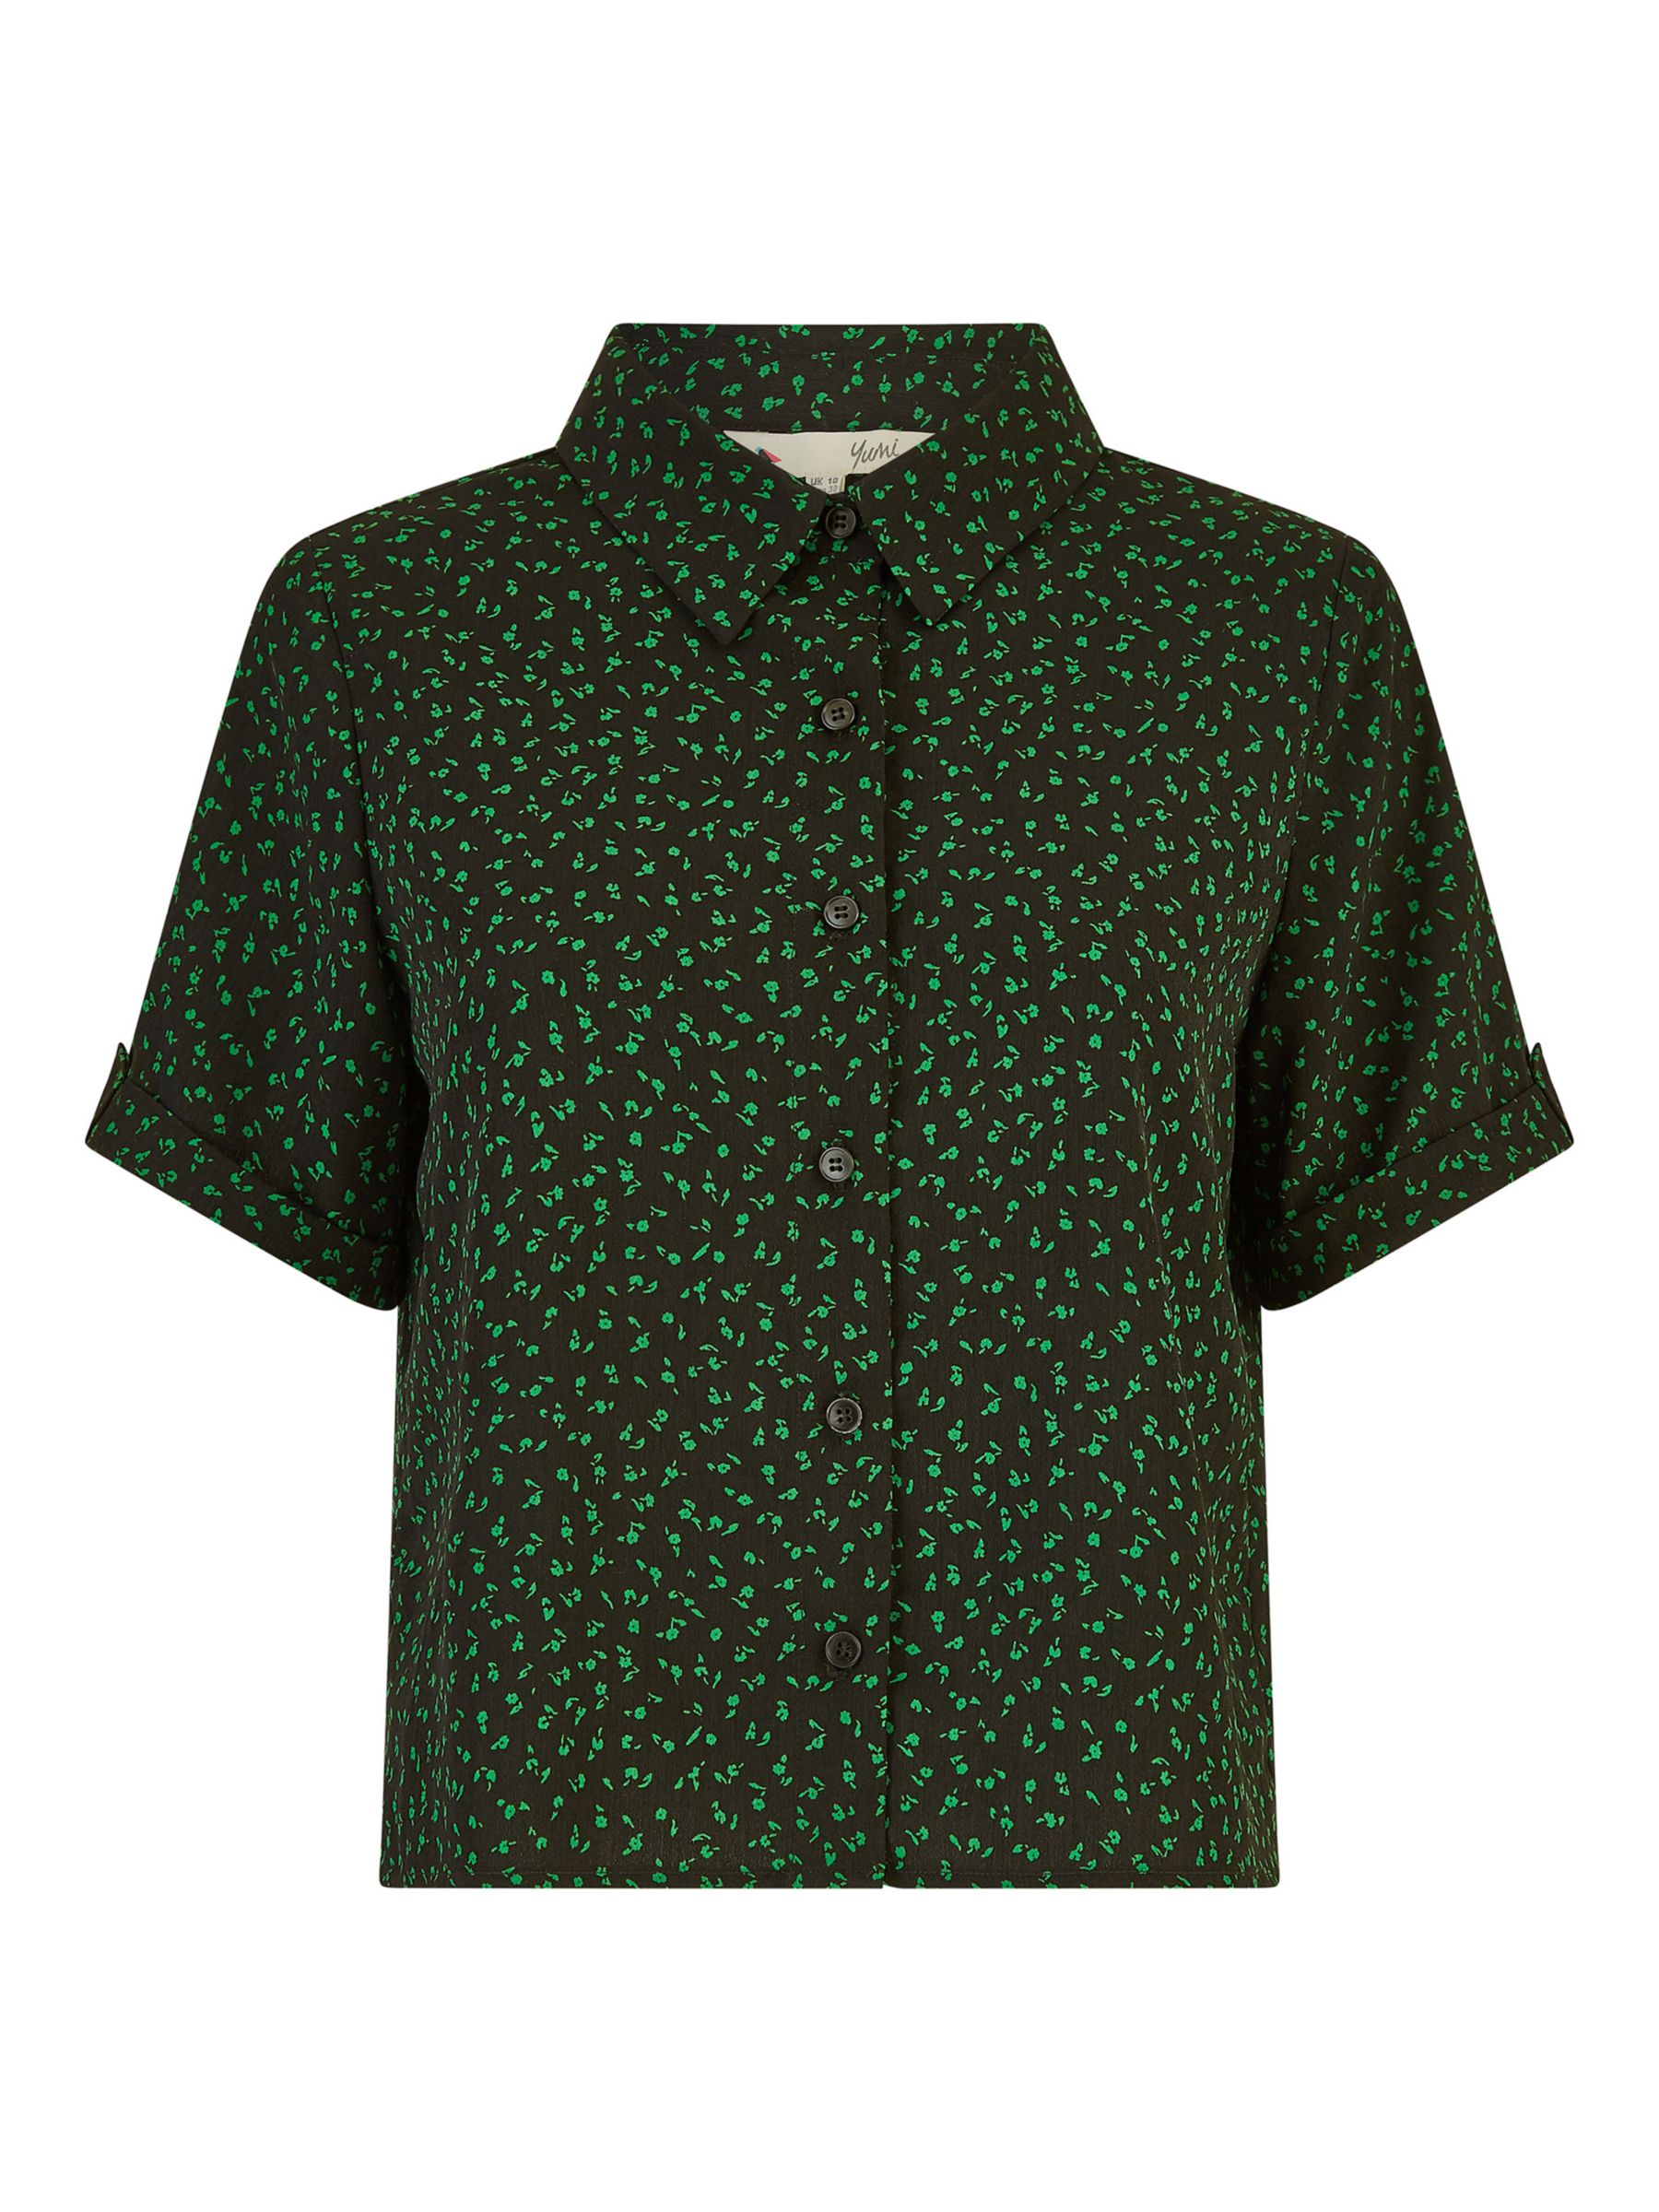 Buy Yumi Ditsy Print Relaxed Fit Shirt, Black/Green Online at johnlewis.com